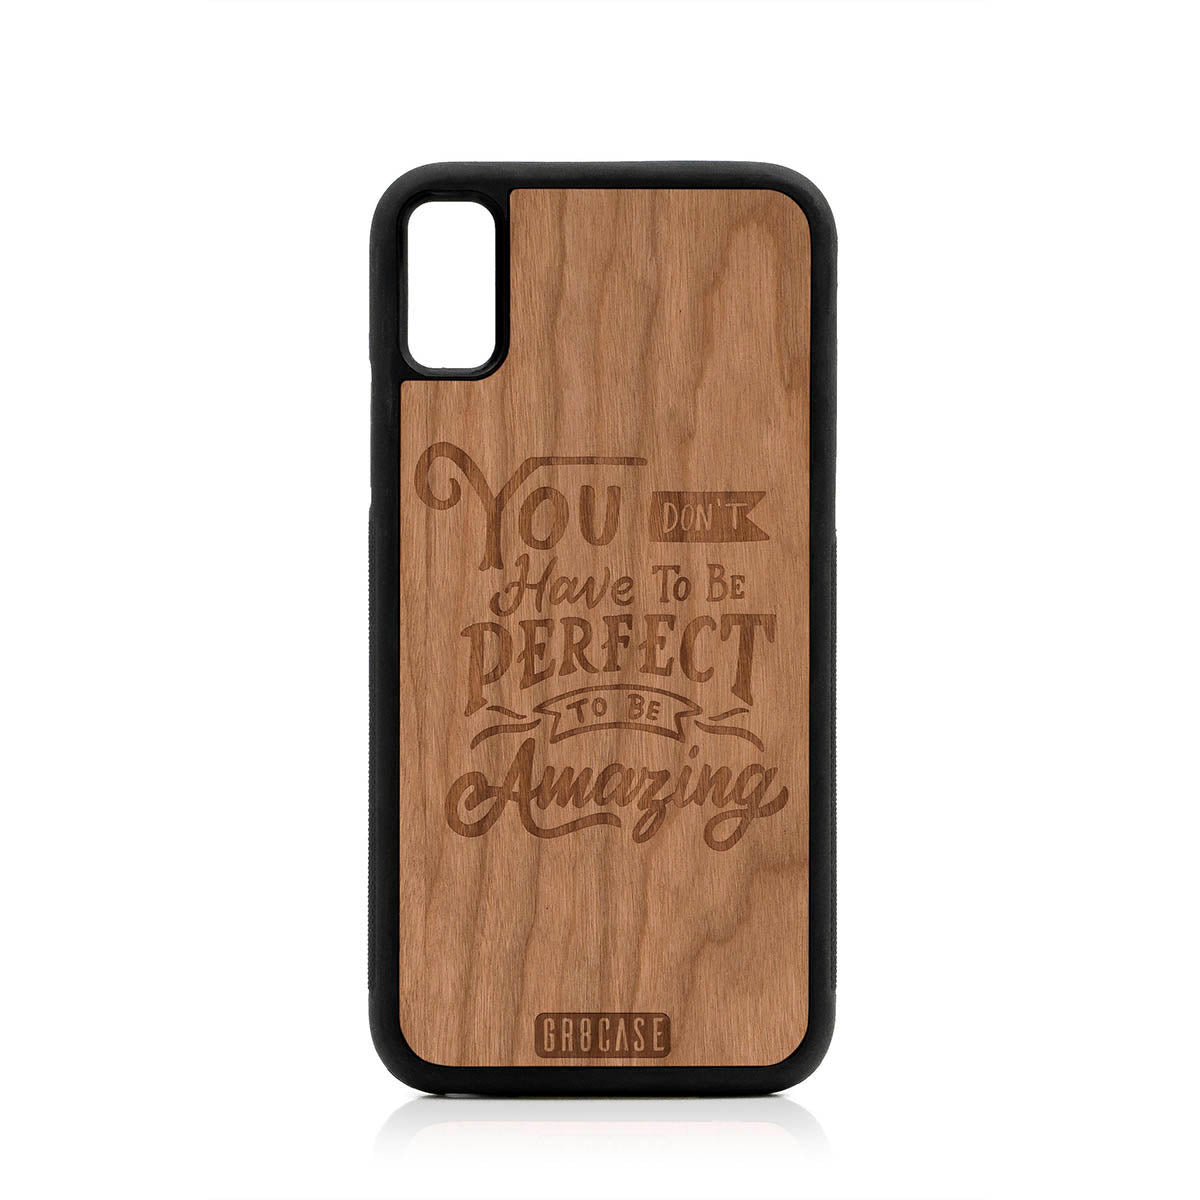 You Don't Have To Be Perfect To Be Amazing Design Wood Case For iPhone XS Max